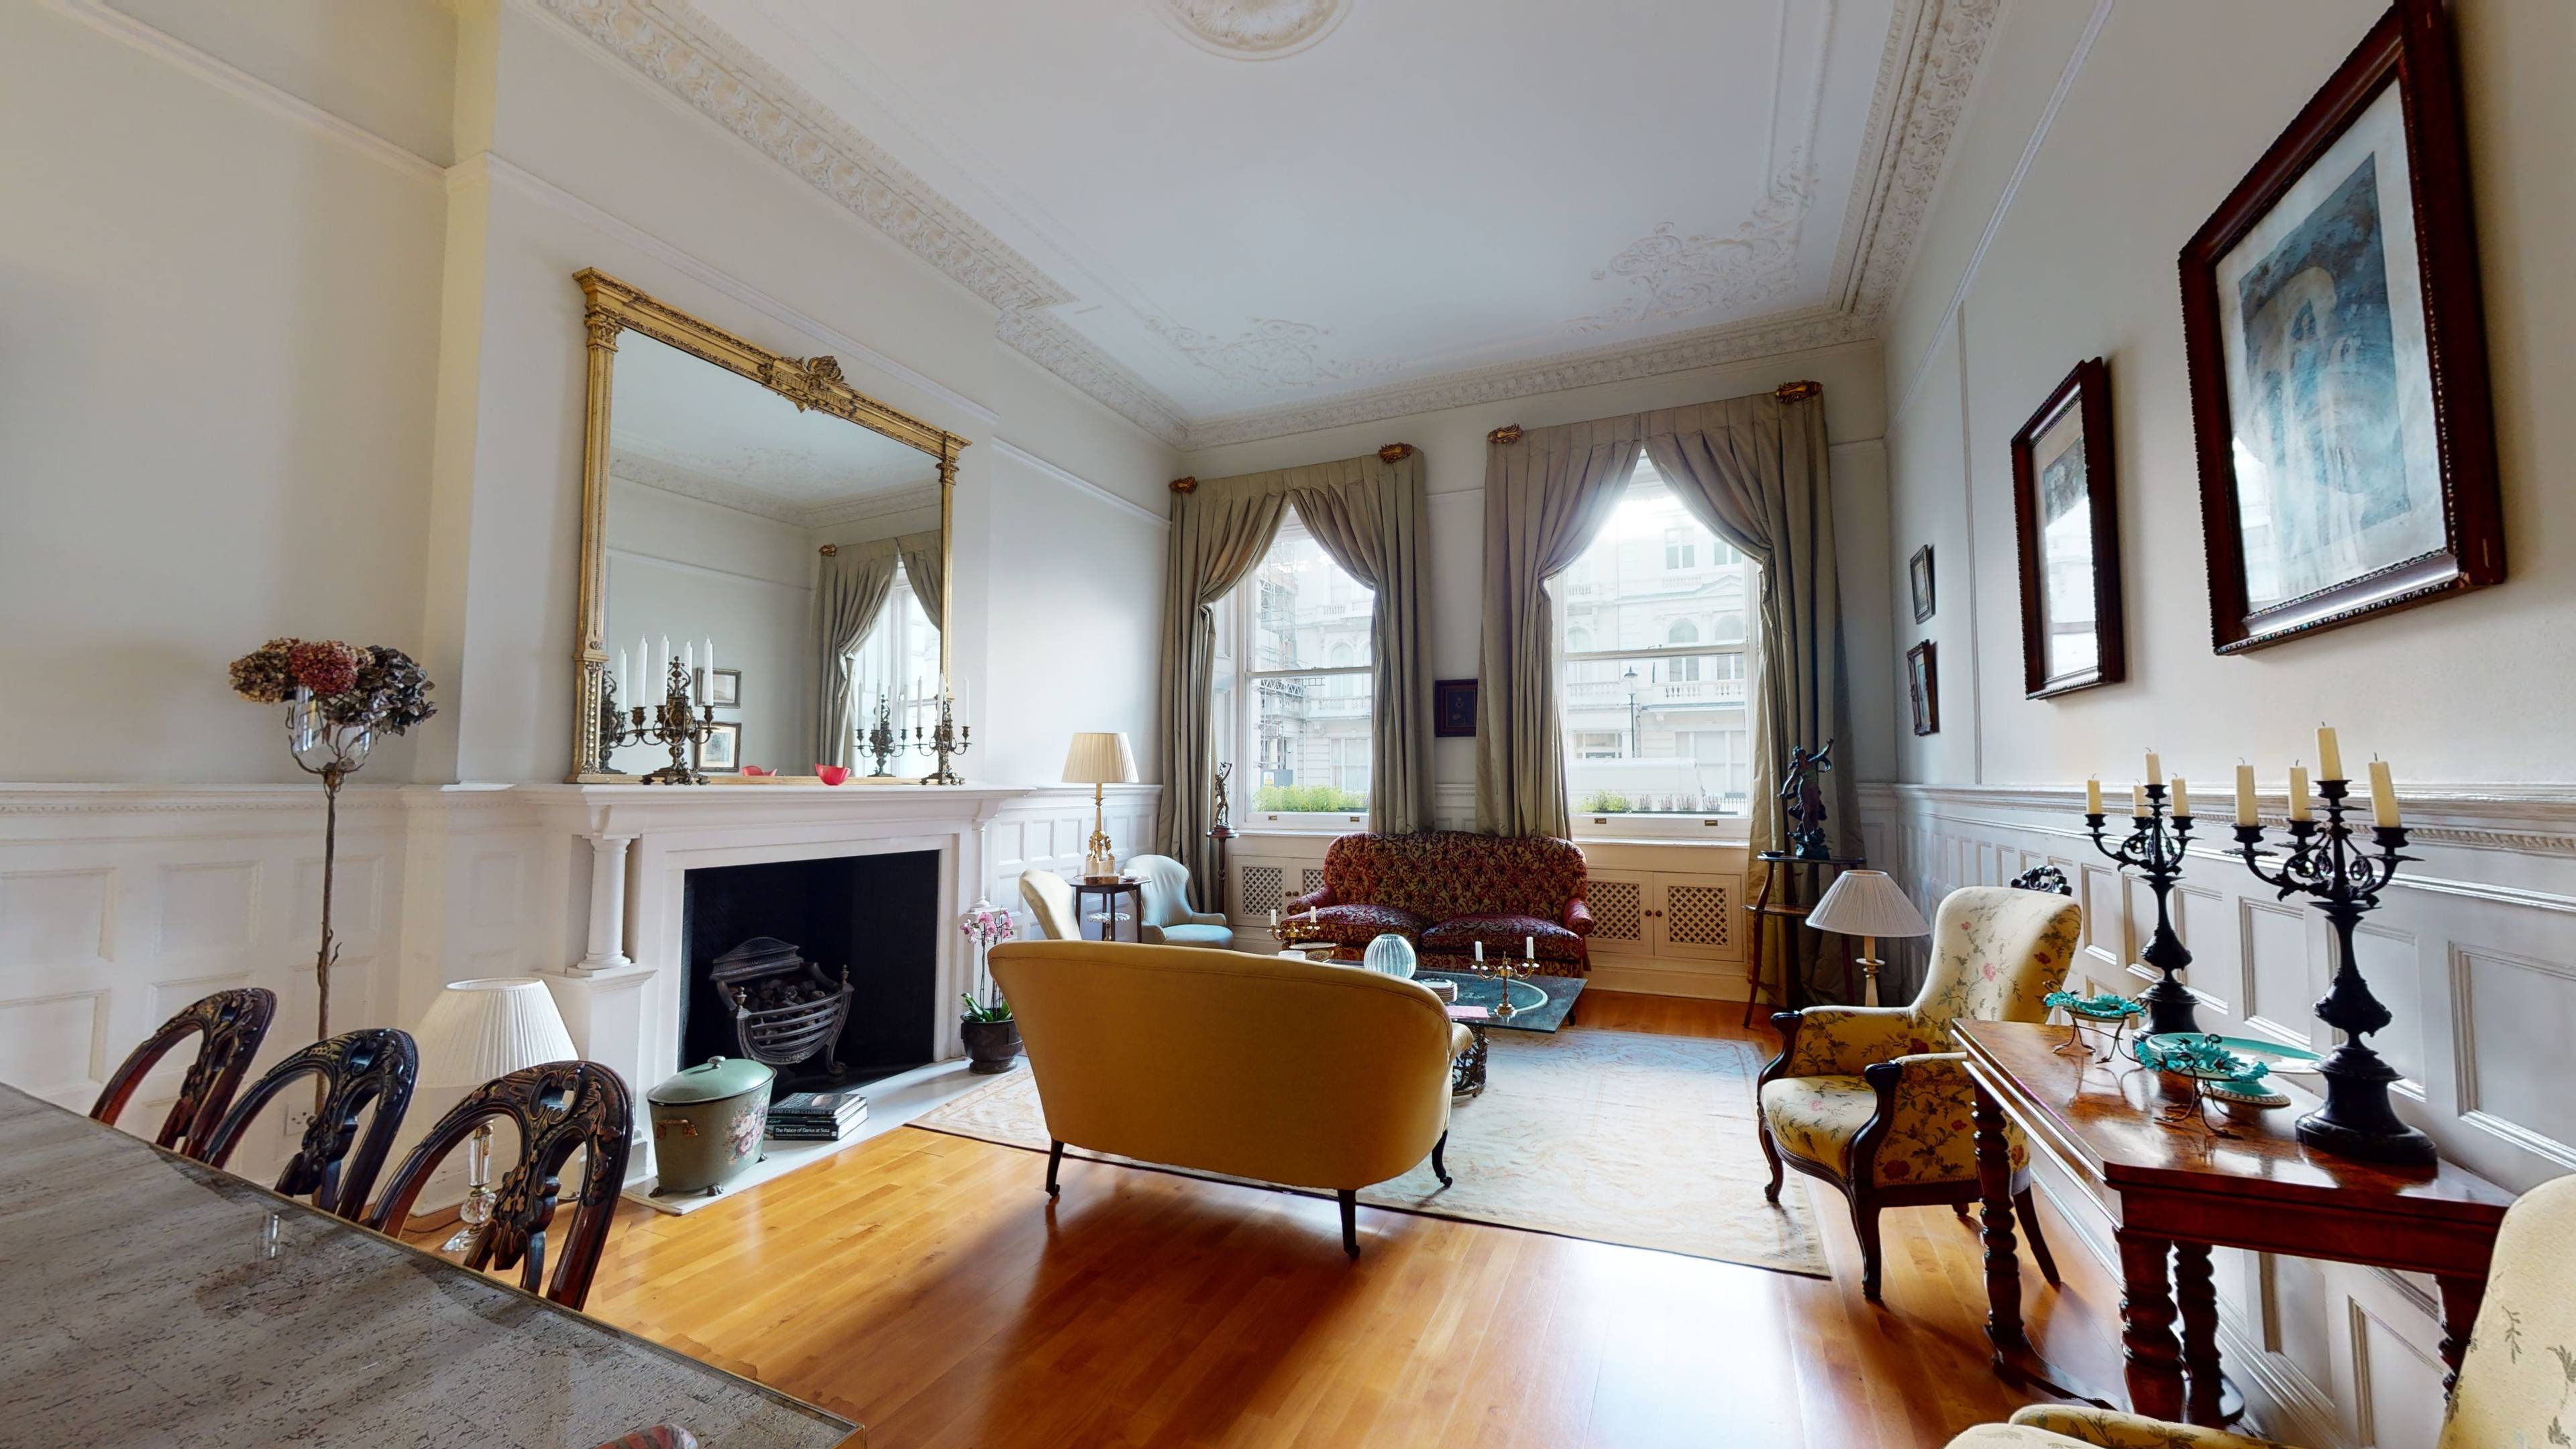 A stunning 3 bedrooms apartment in a very attractive period building located in this prestigious South Kensington address.